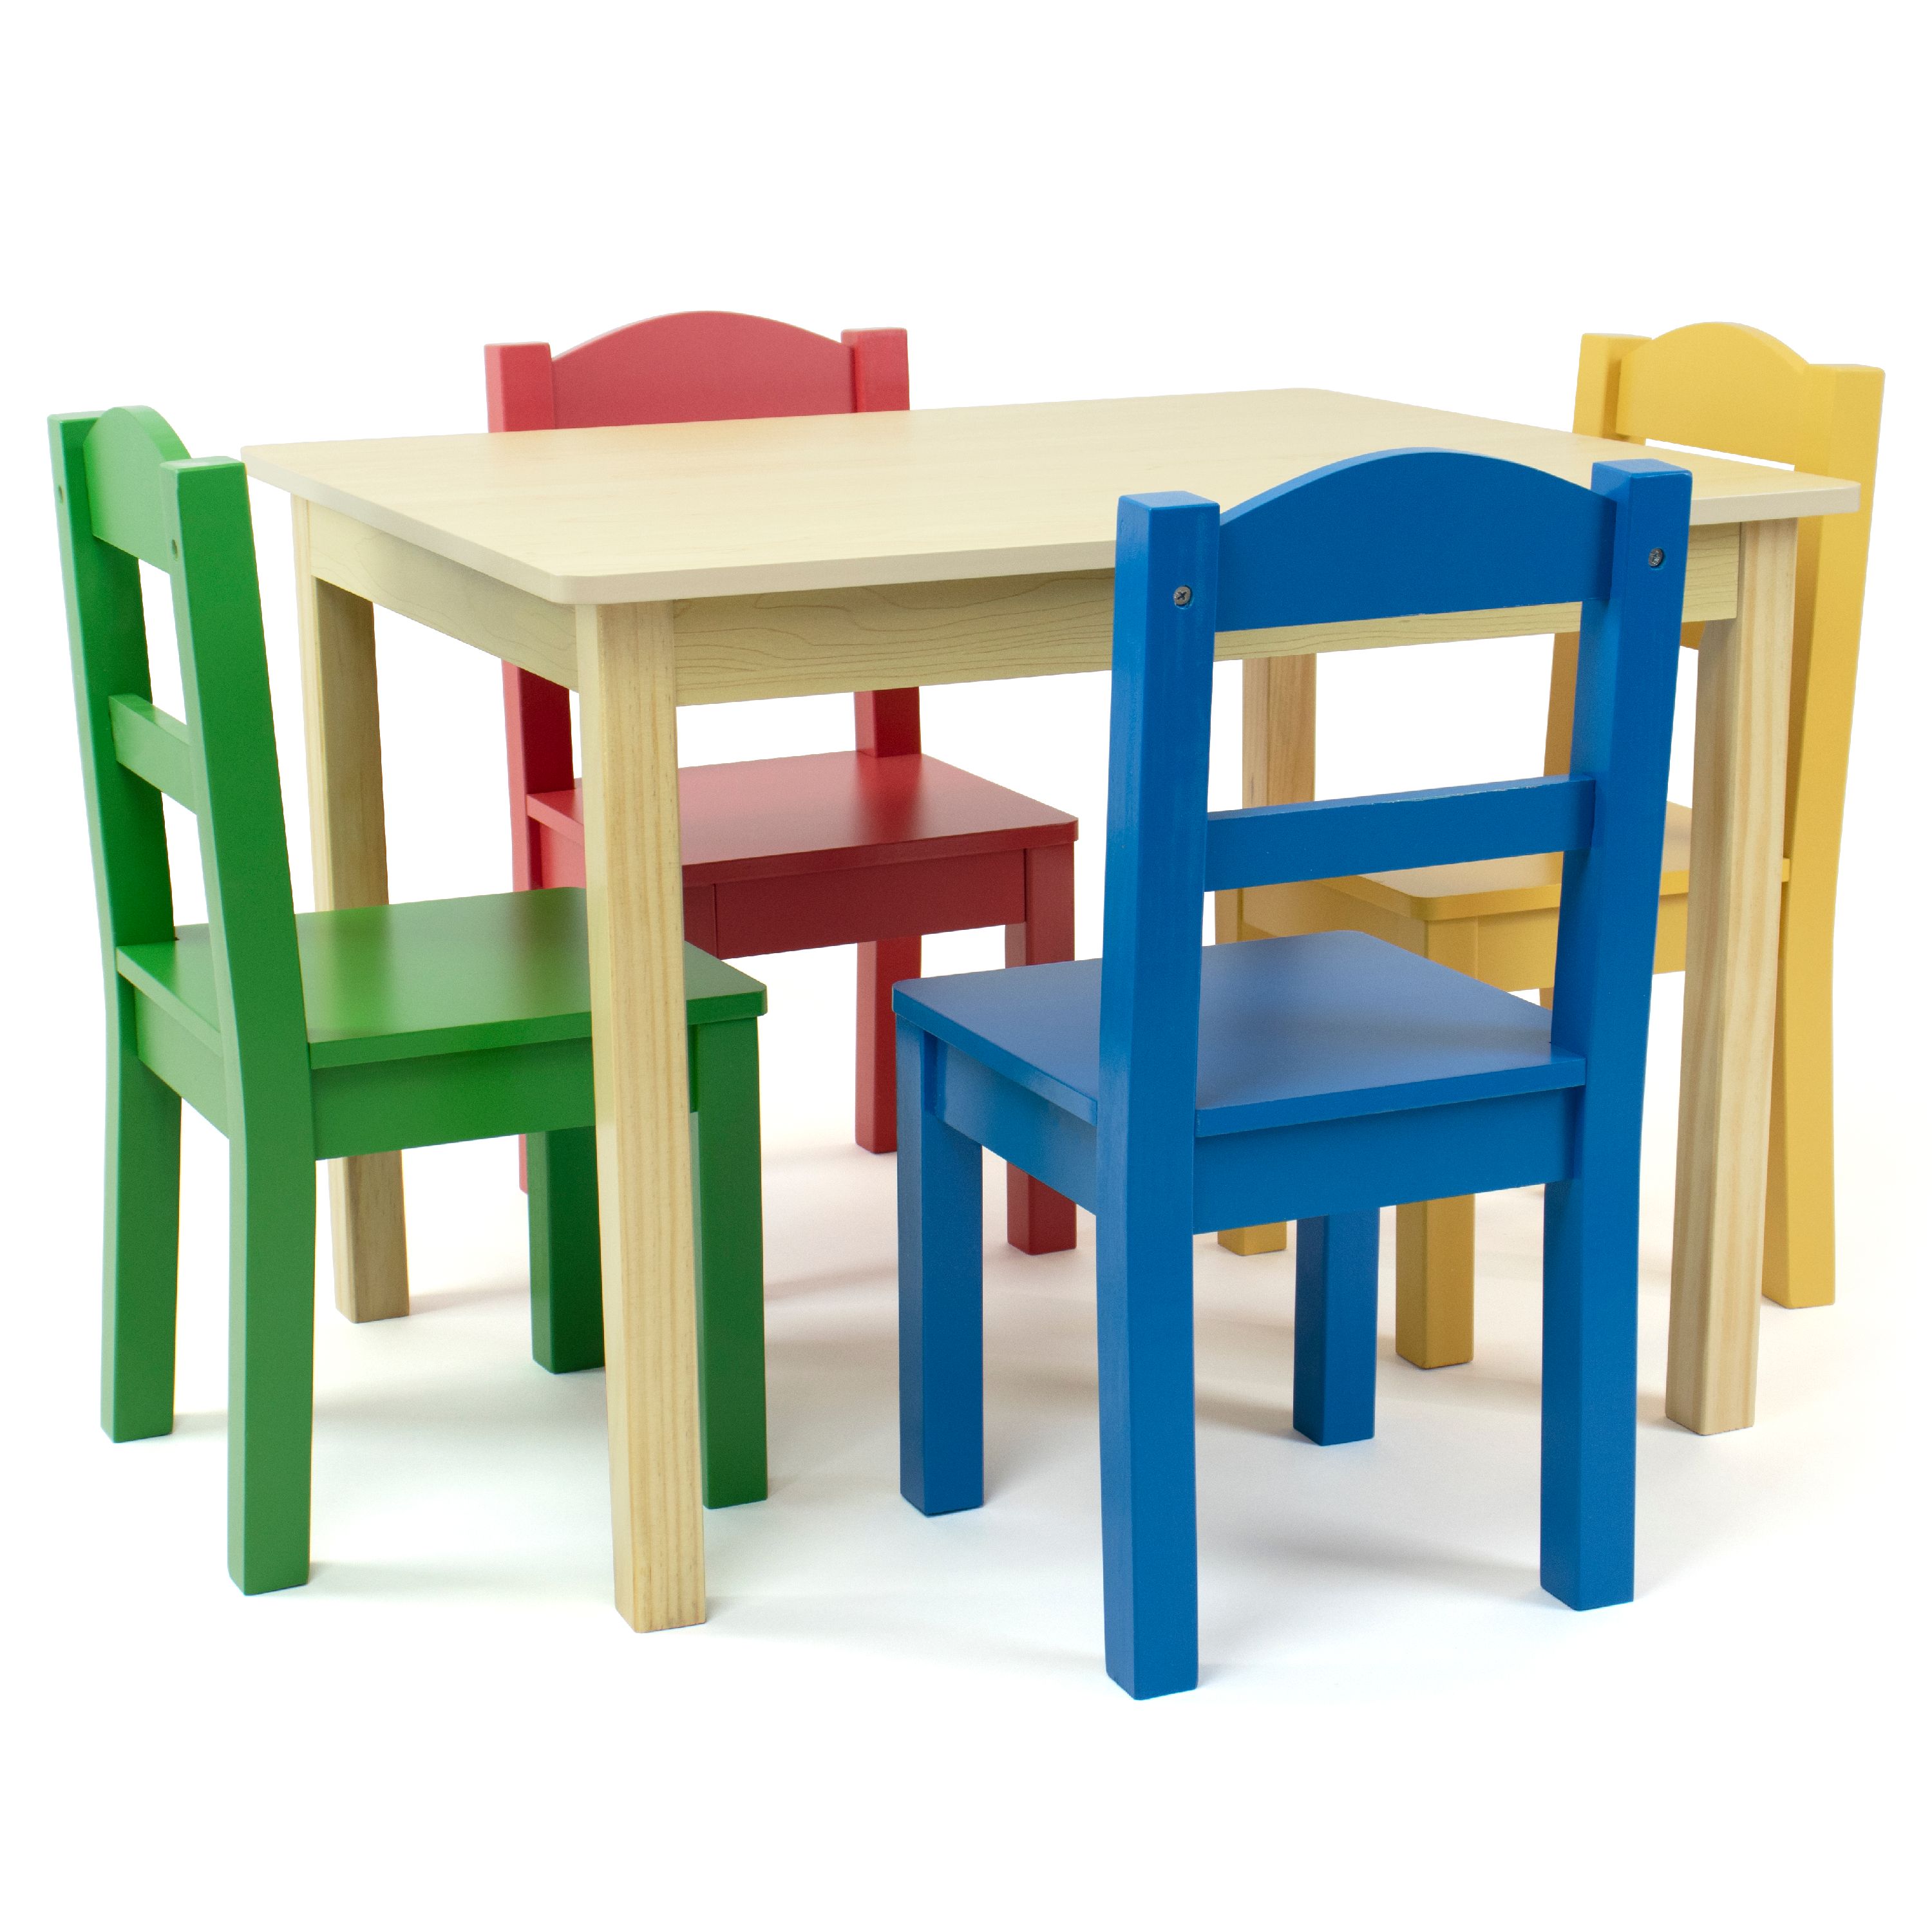 Humble Crew Primary Kids Wood Table and 4 Chairs Set, Natural Wood/Primary, for kids ages 3+ - image 3 of 5